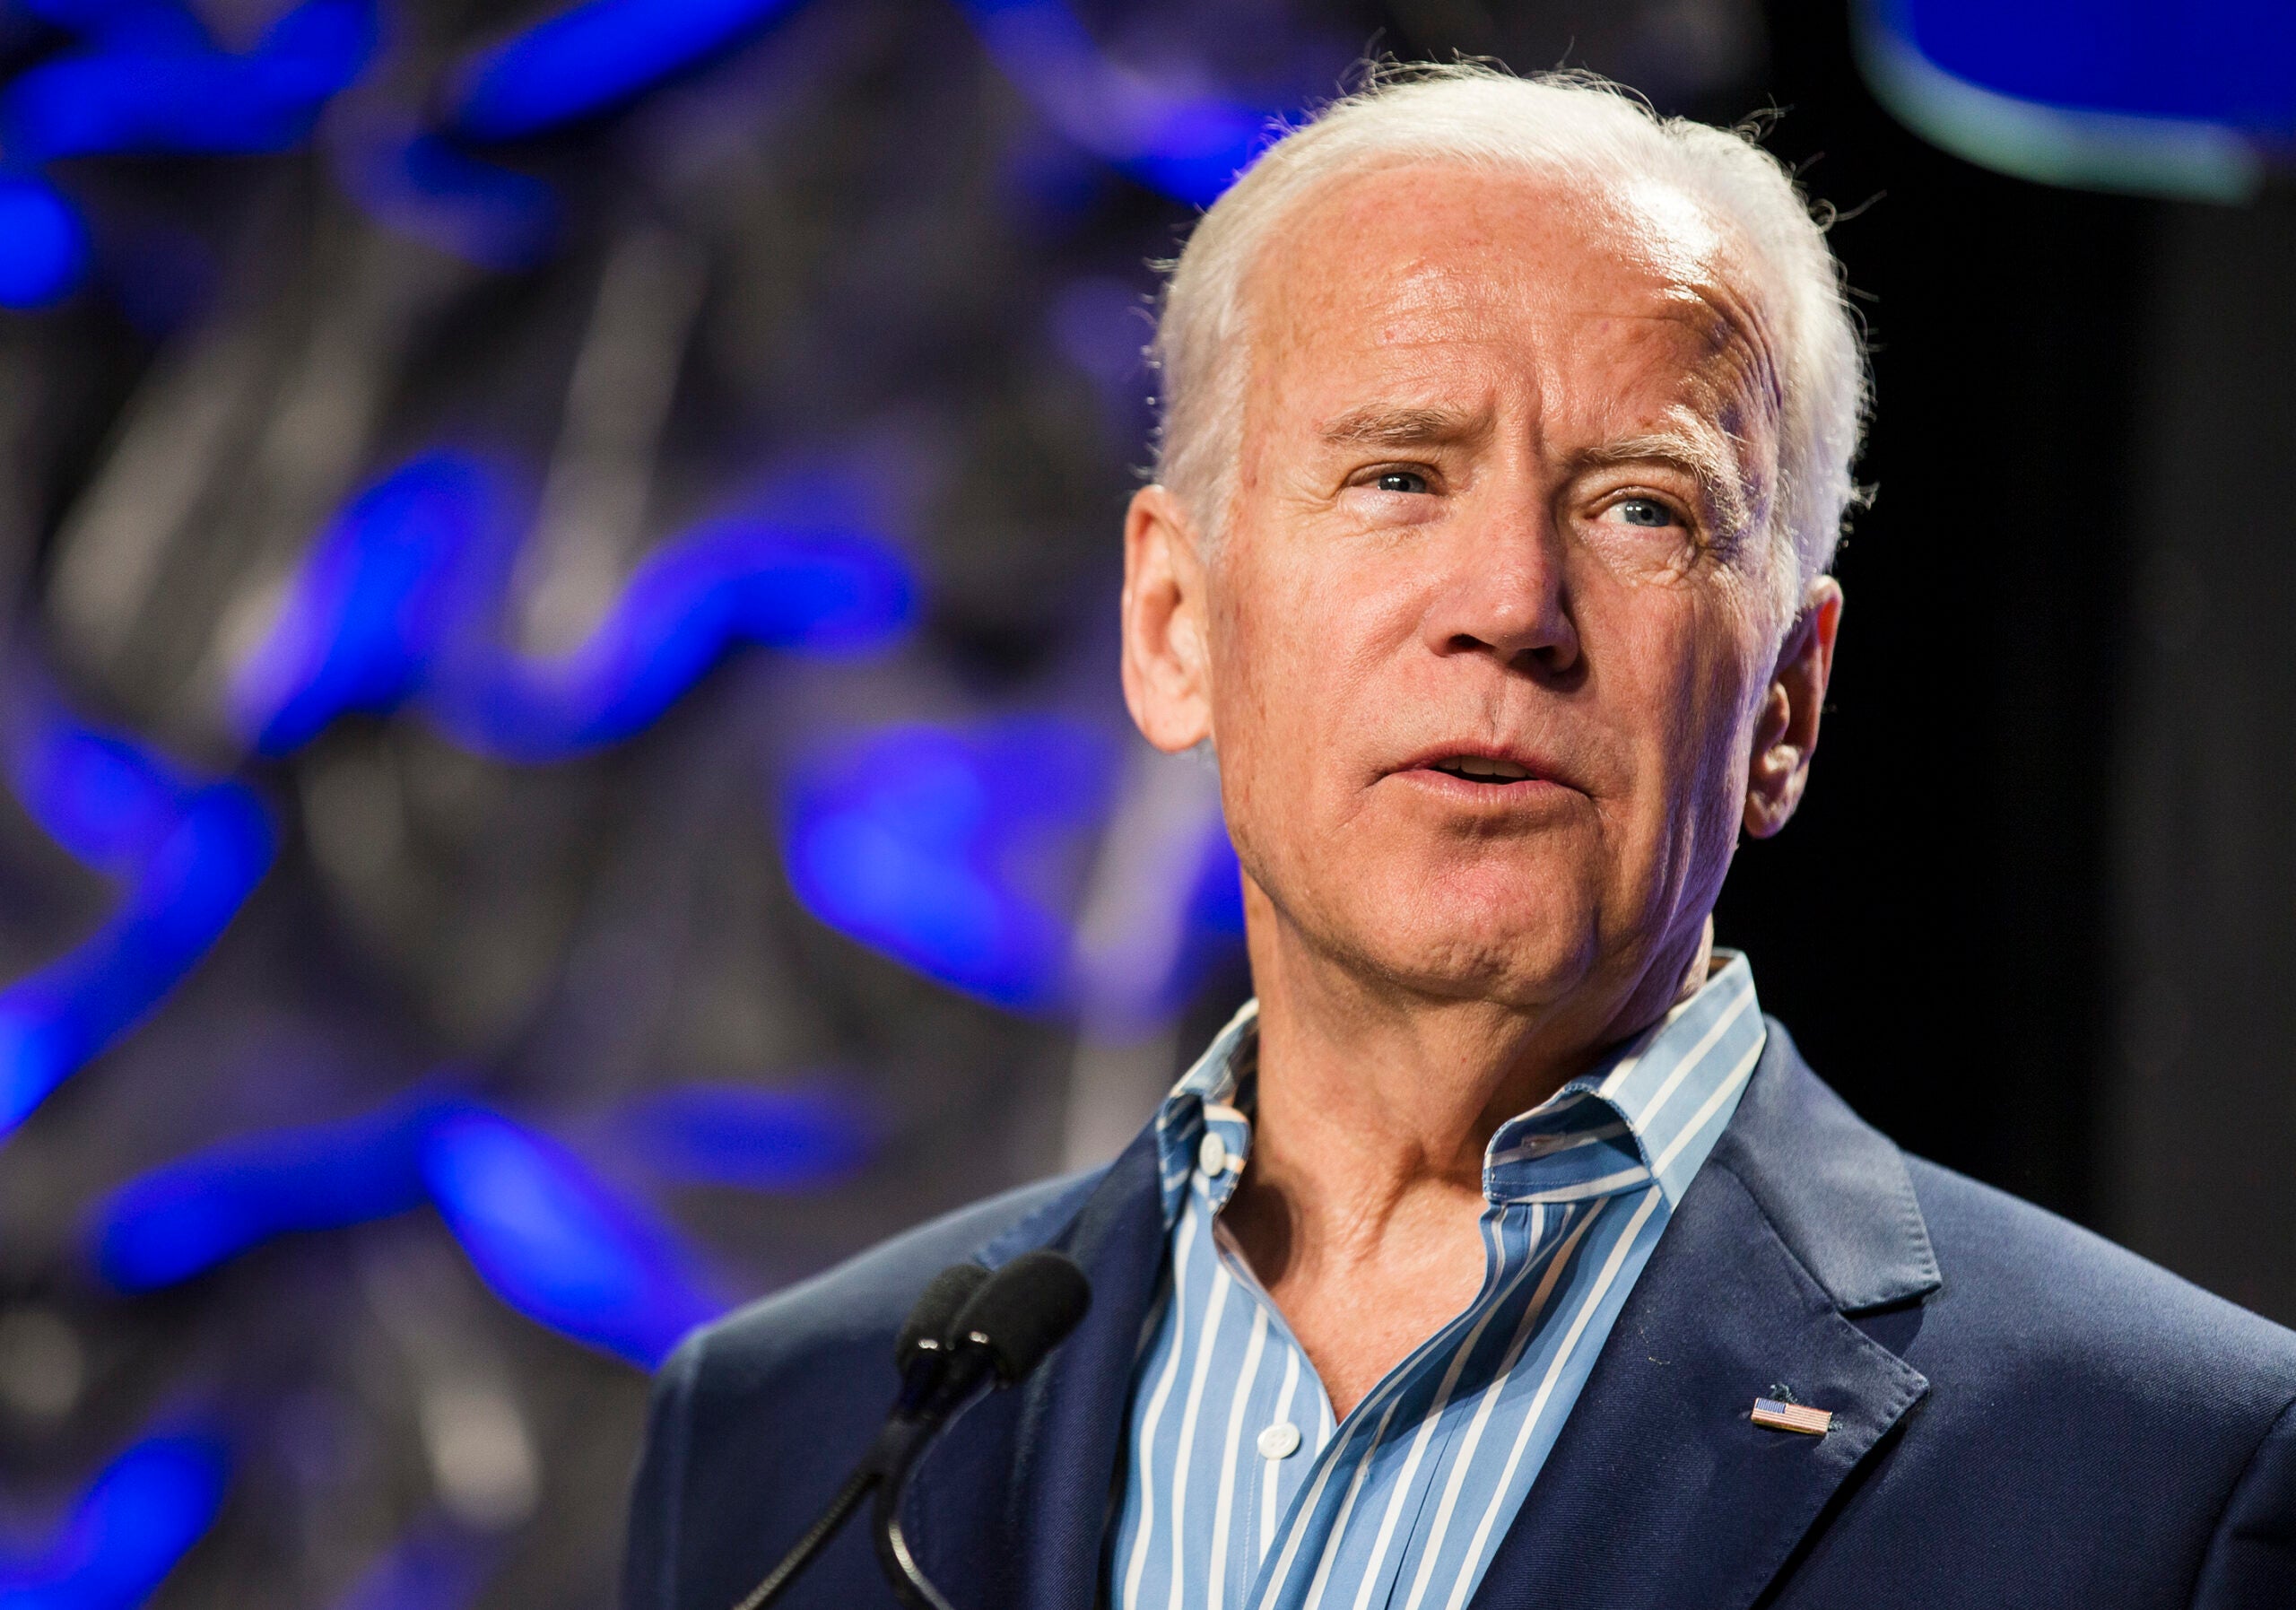 Joe Biden to deliver Colby College commencement address